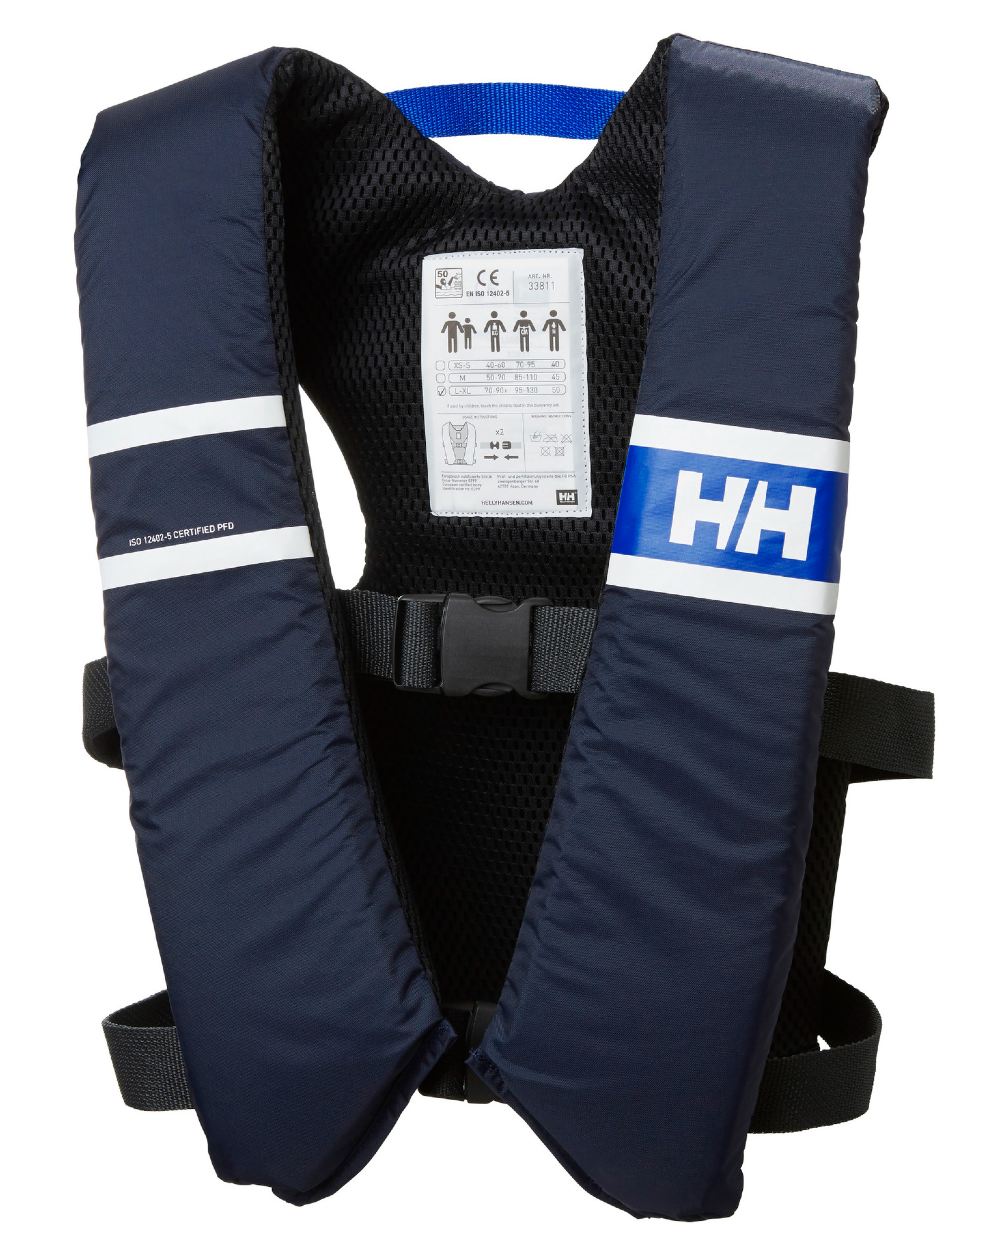 Evening Blue coloured Helly Hansen Comfort Compact 50N Life Vest on white background 